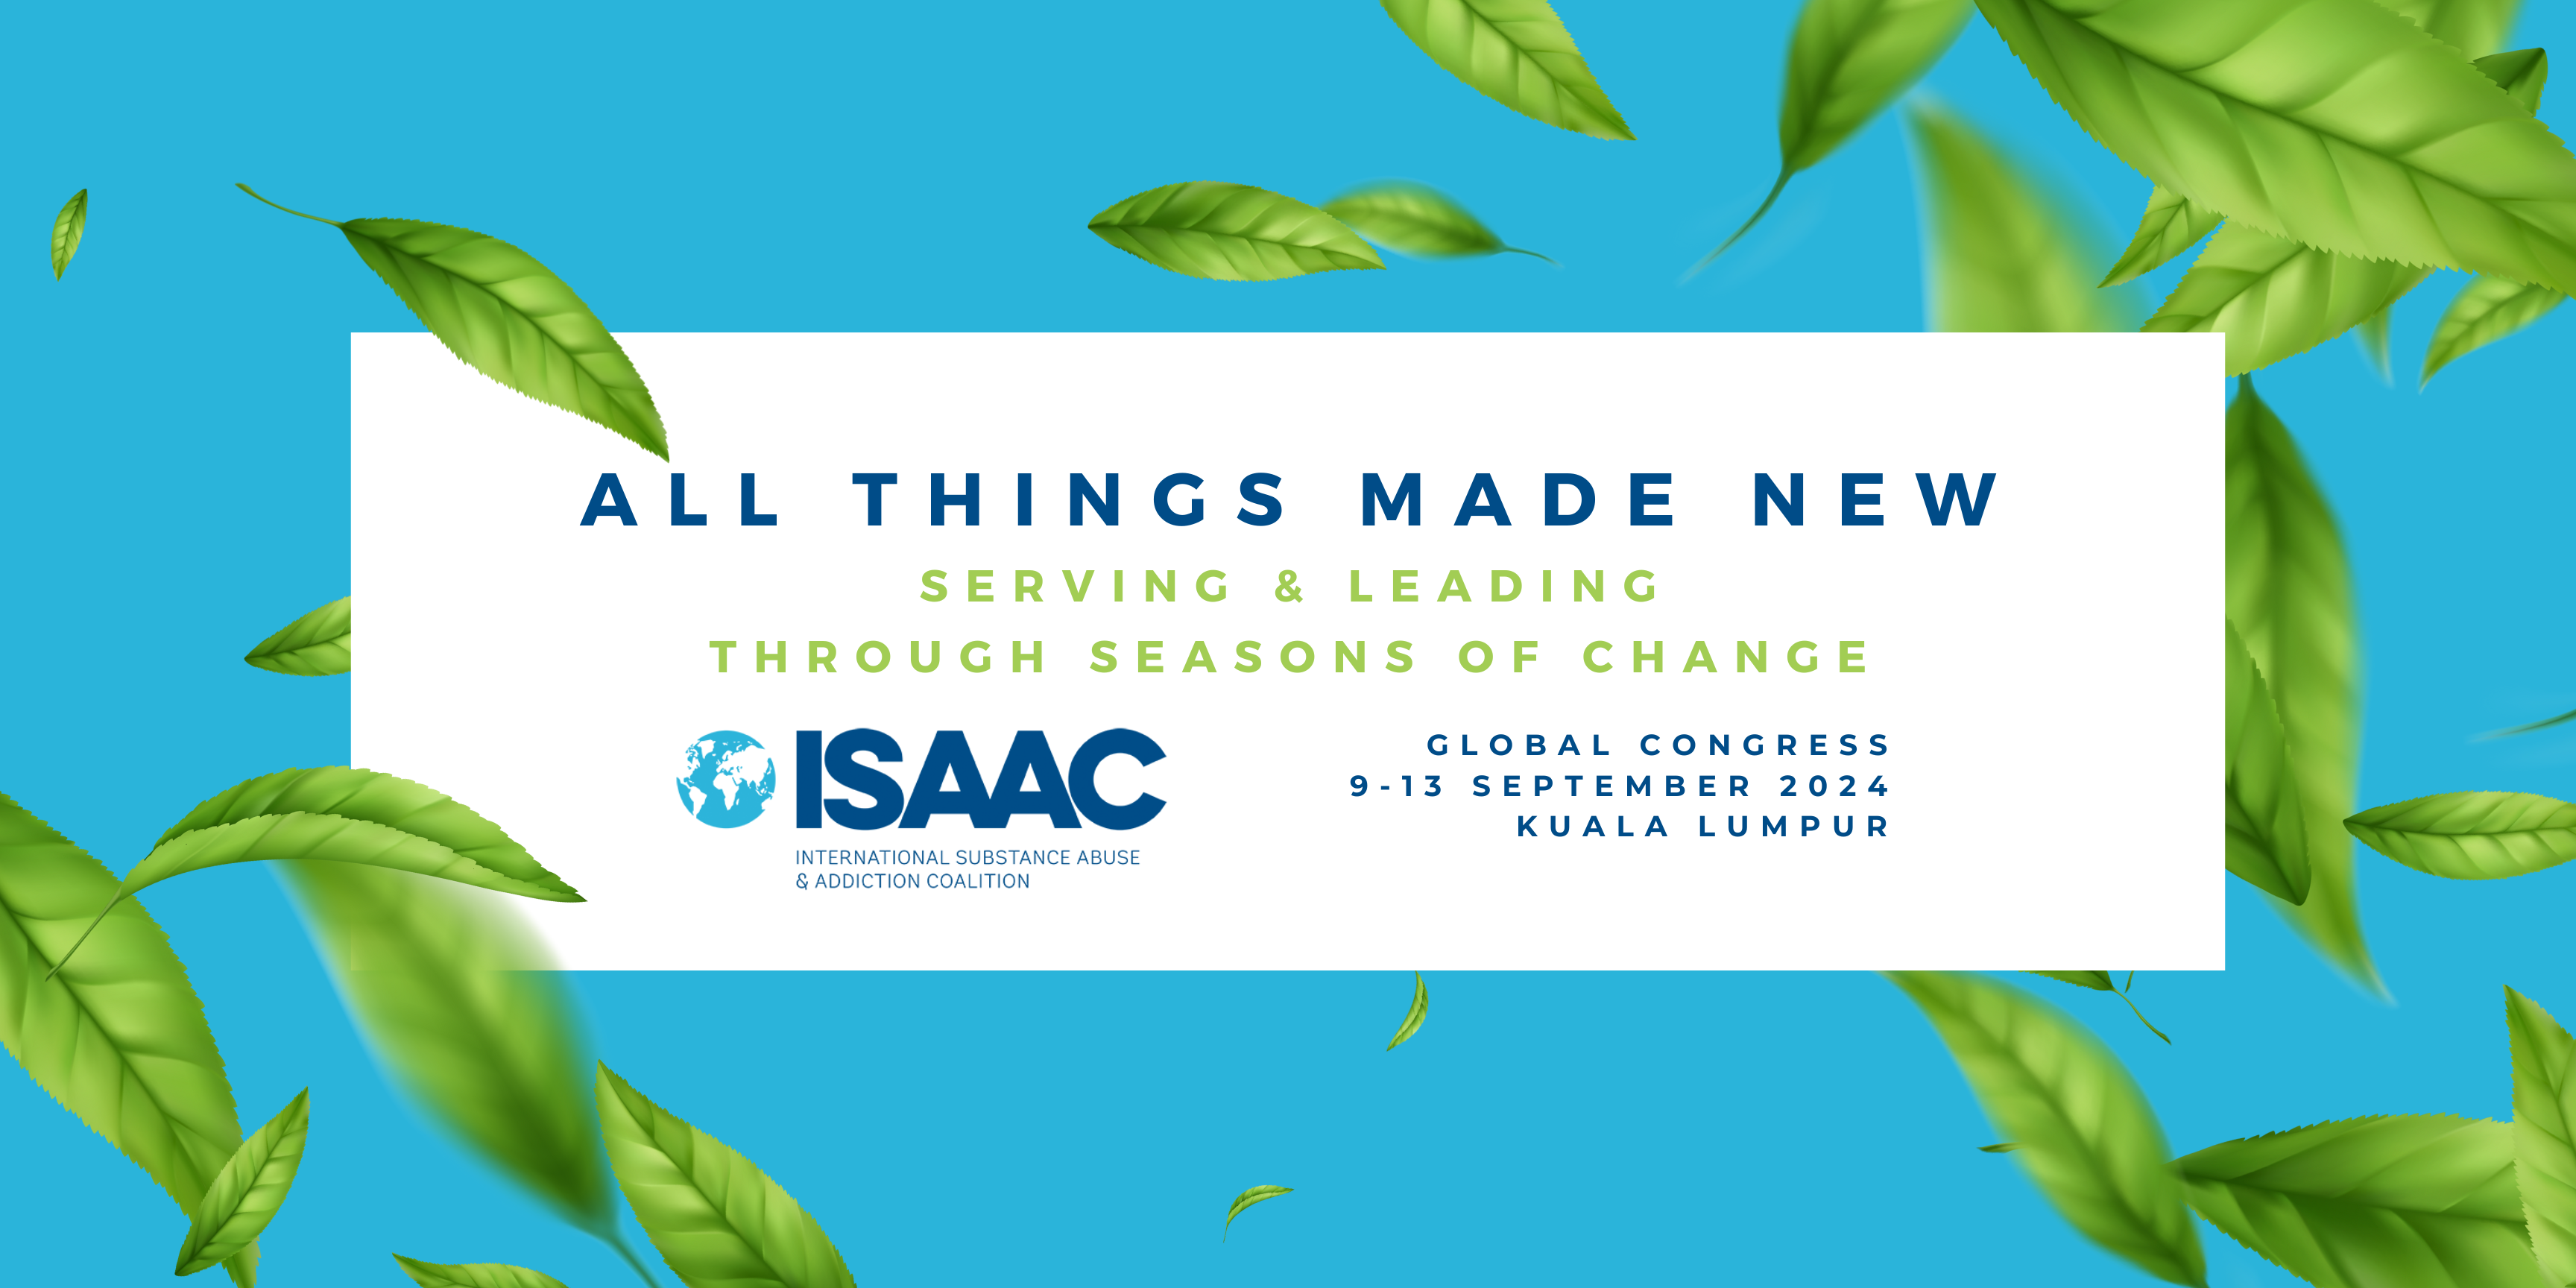 All Things Made New ISAAC Conference 2024